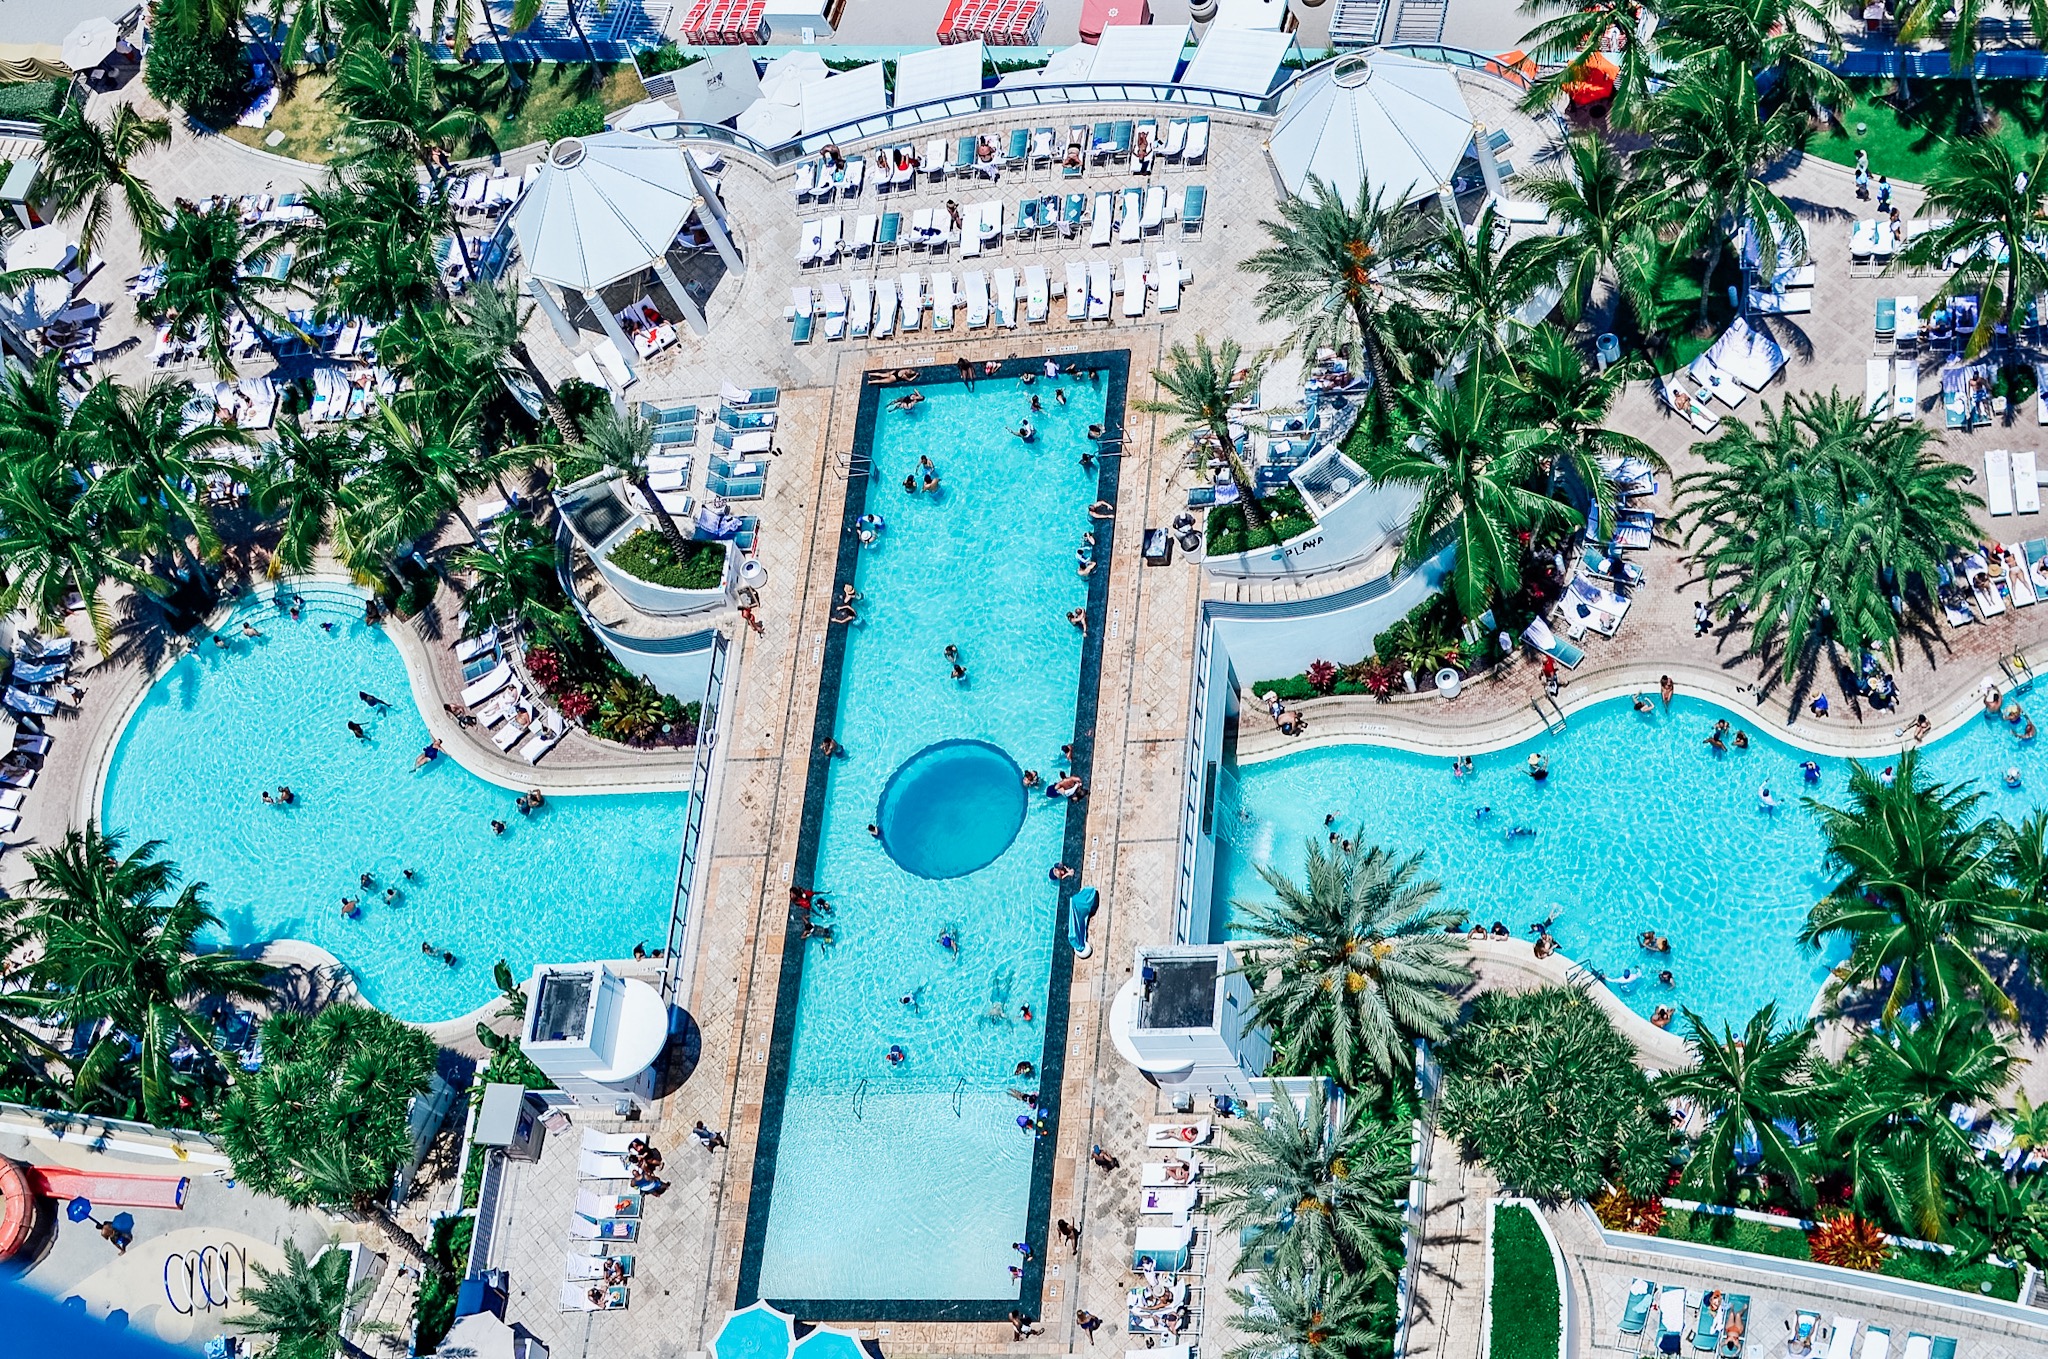 9 Reasons My Kids Love The Diplomat Beach Resort in Hollywood, Florida — A  Mom Explores | Family Travel Tips, Destination Guides with Kids, Family  Vacation Ideas, and more!